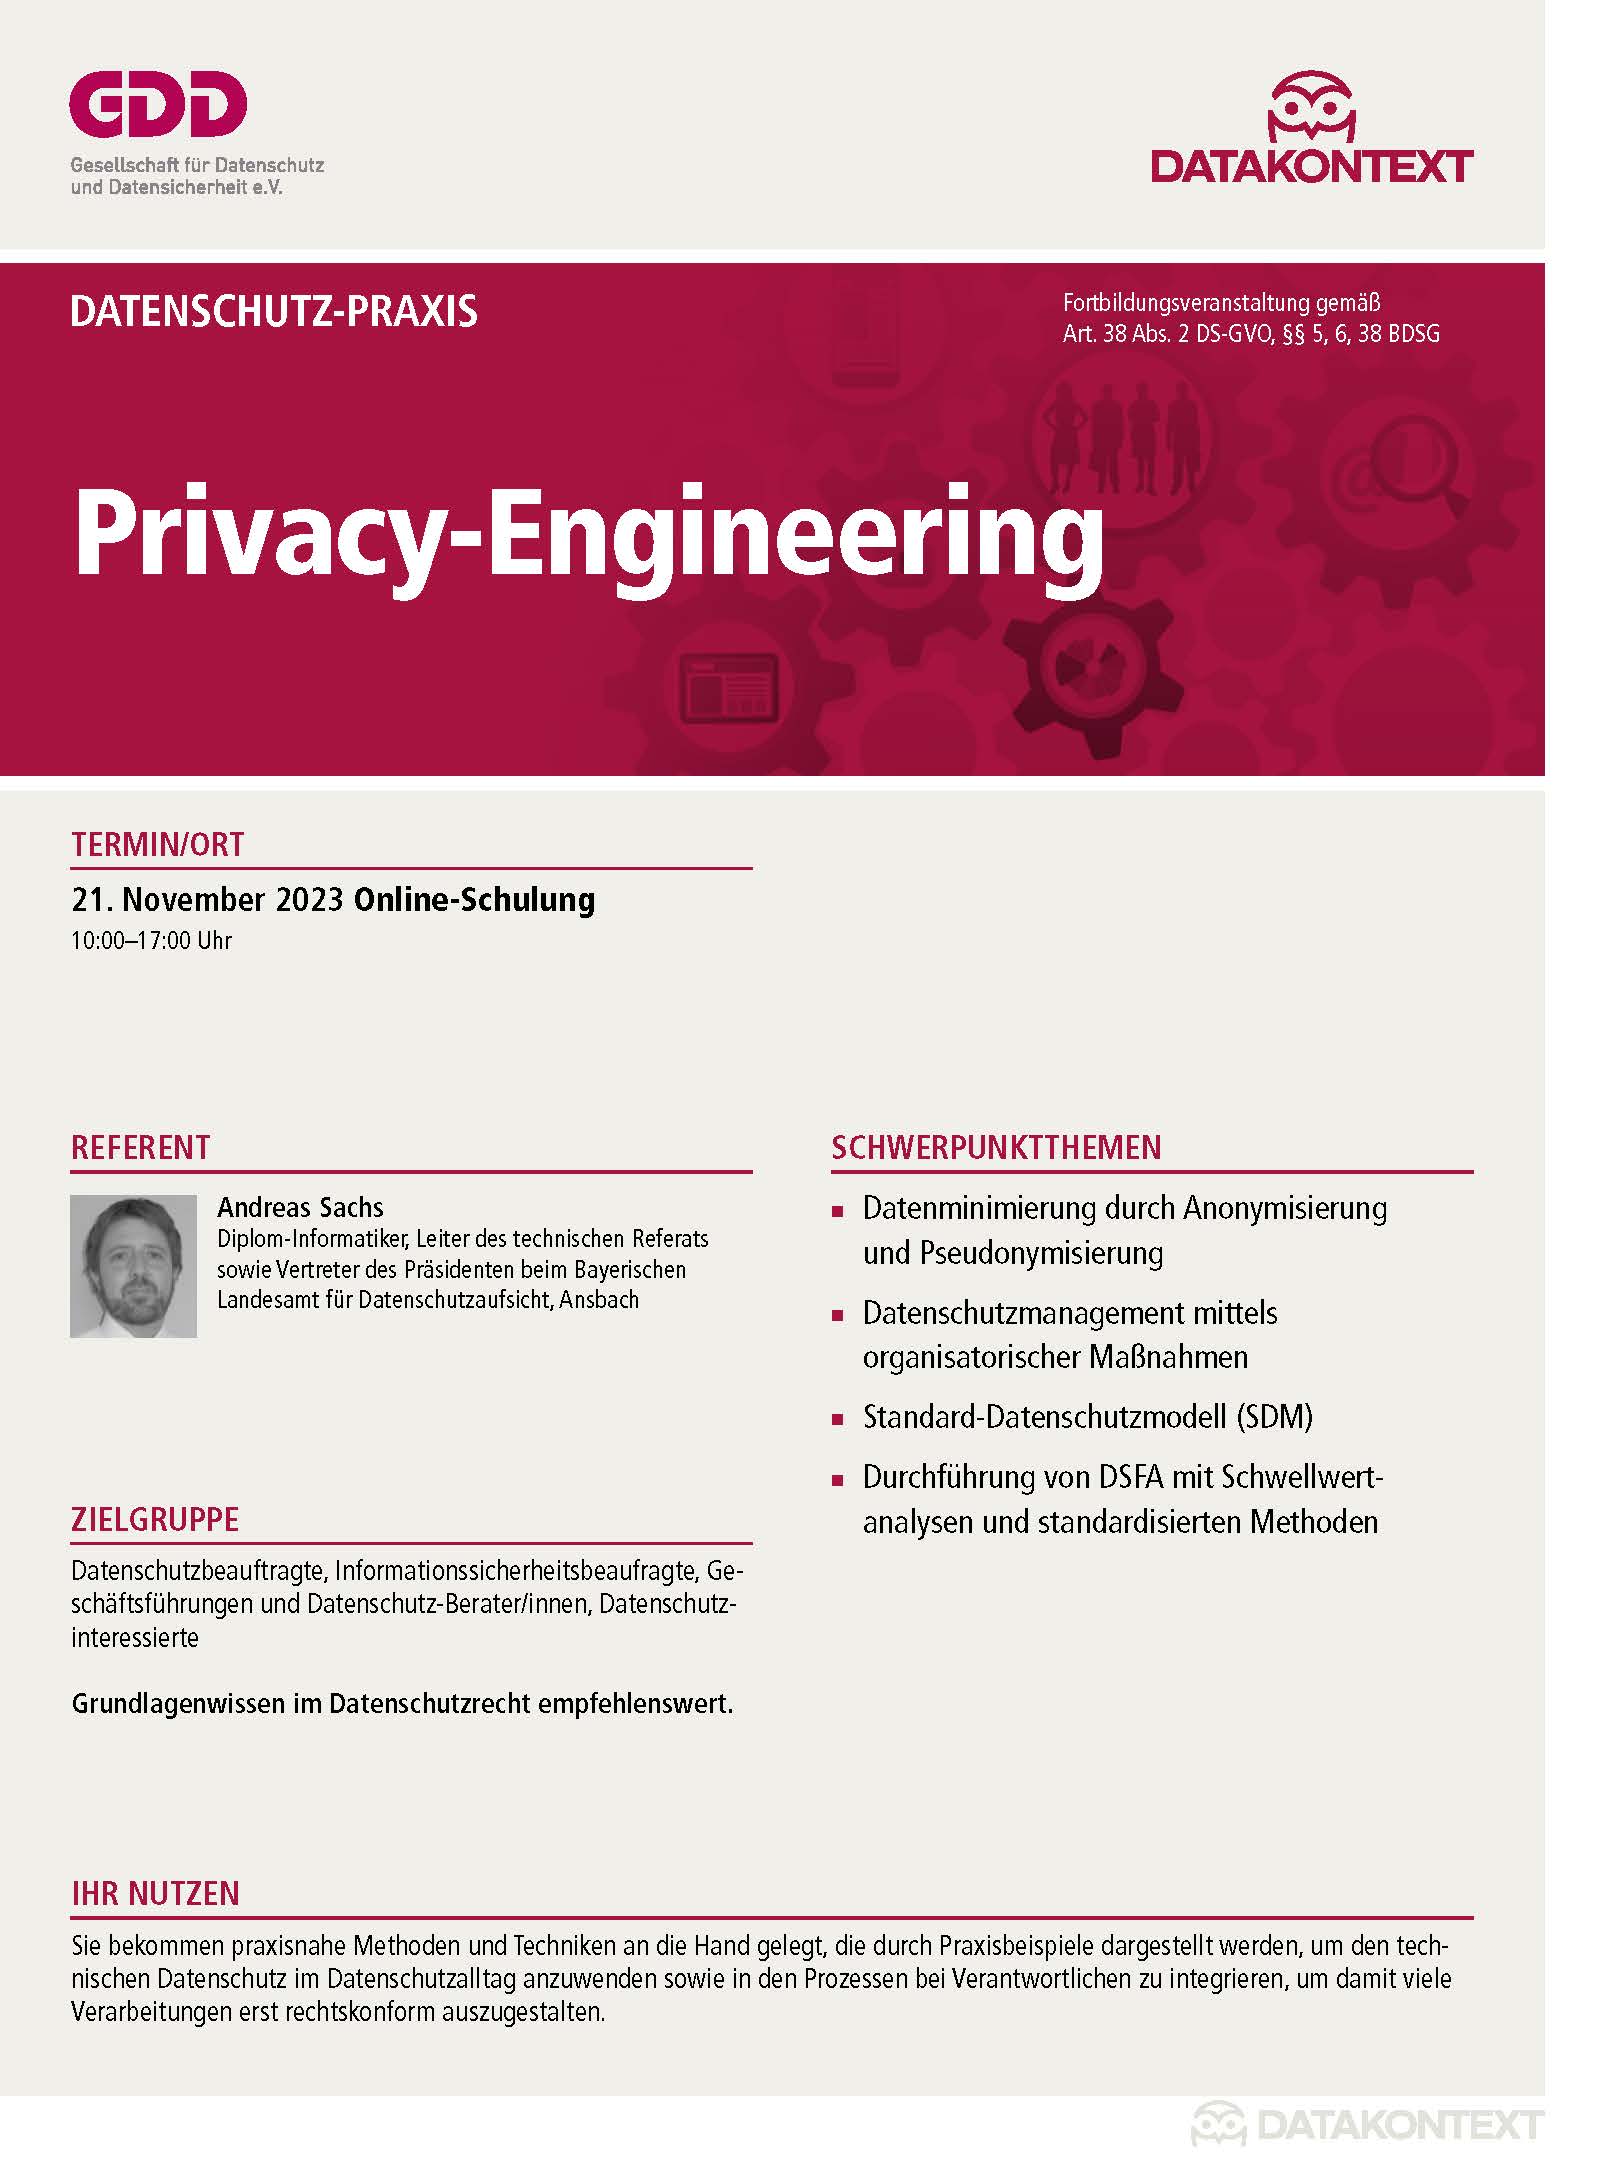 Privacy-Engineering